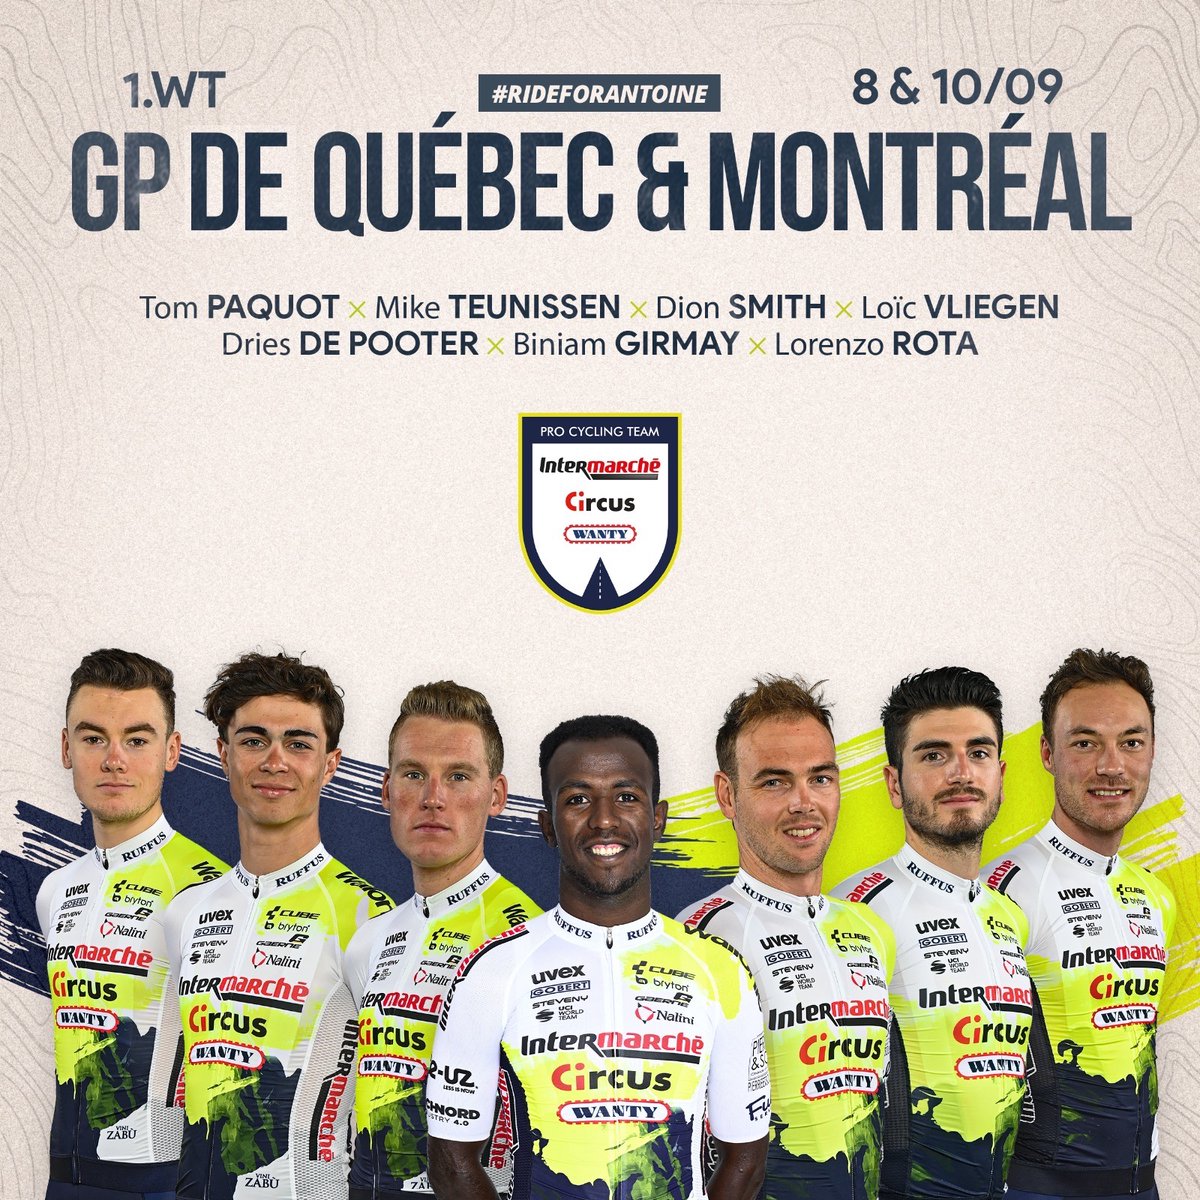 We arrived in Canada for GP Québec (Friday) and GP Montréal (Sunday) 👋🇨🇦 #GPCQM 🇧🇪 Dries De Pooter 🇪🇷 Biniam Girmay 🇧🇪 Tom Paquot 🇮🇹 Lorenzo Rota 🇳🇿 Dion Smith 🇳🇱 Mike Teunissen 🇧🇪 Loïc Vliegen